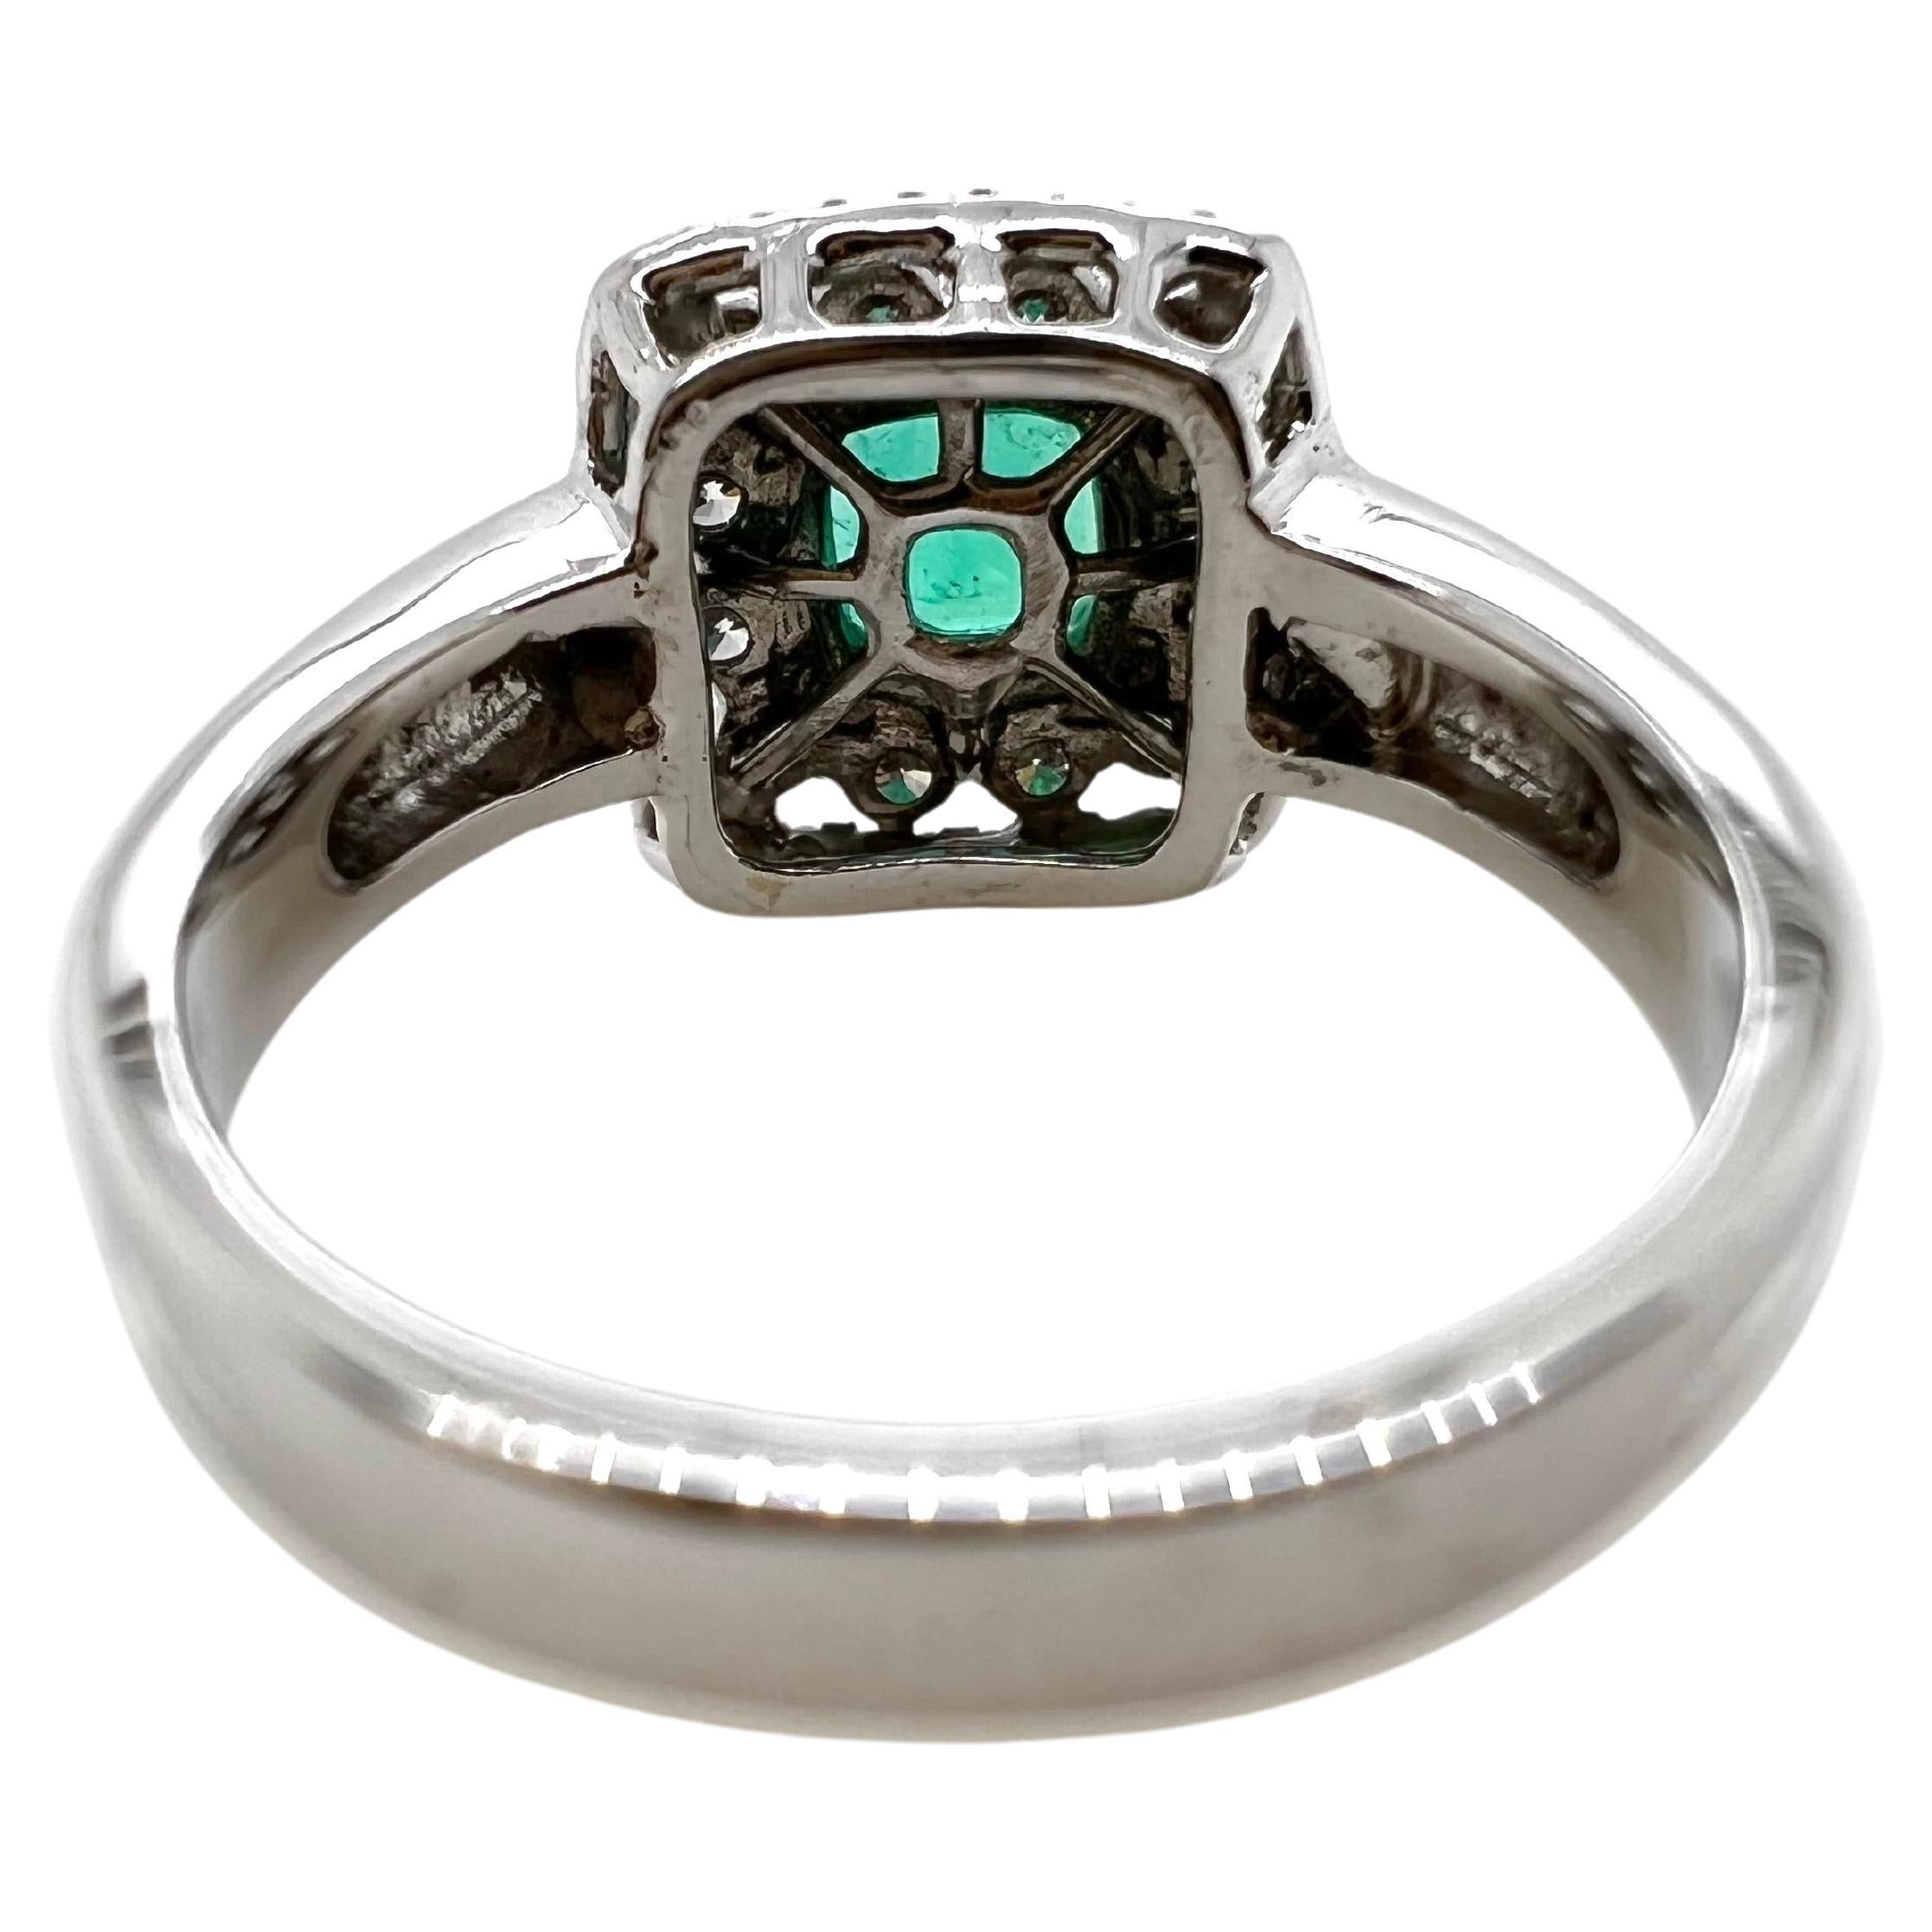 Contemporary 14k White Gold Emerald and Diamond Ring